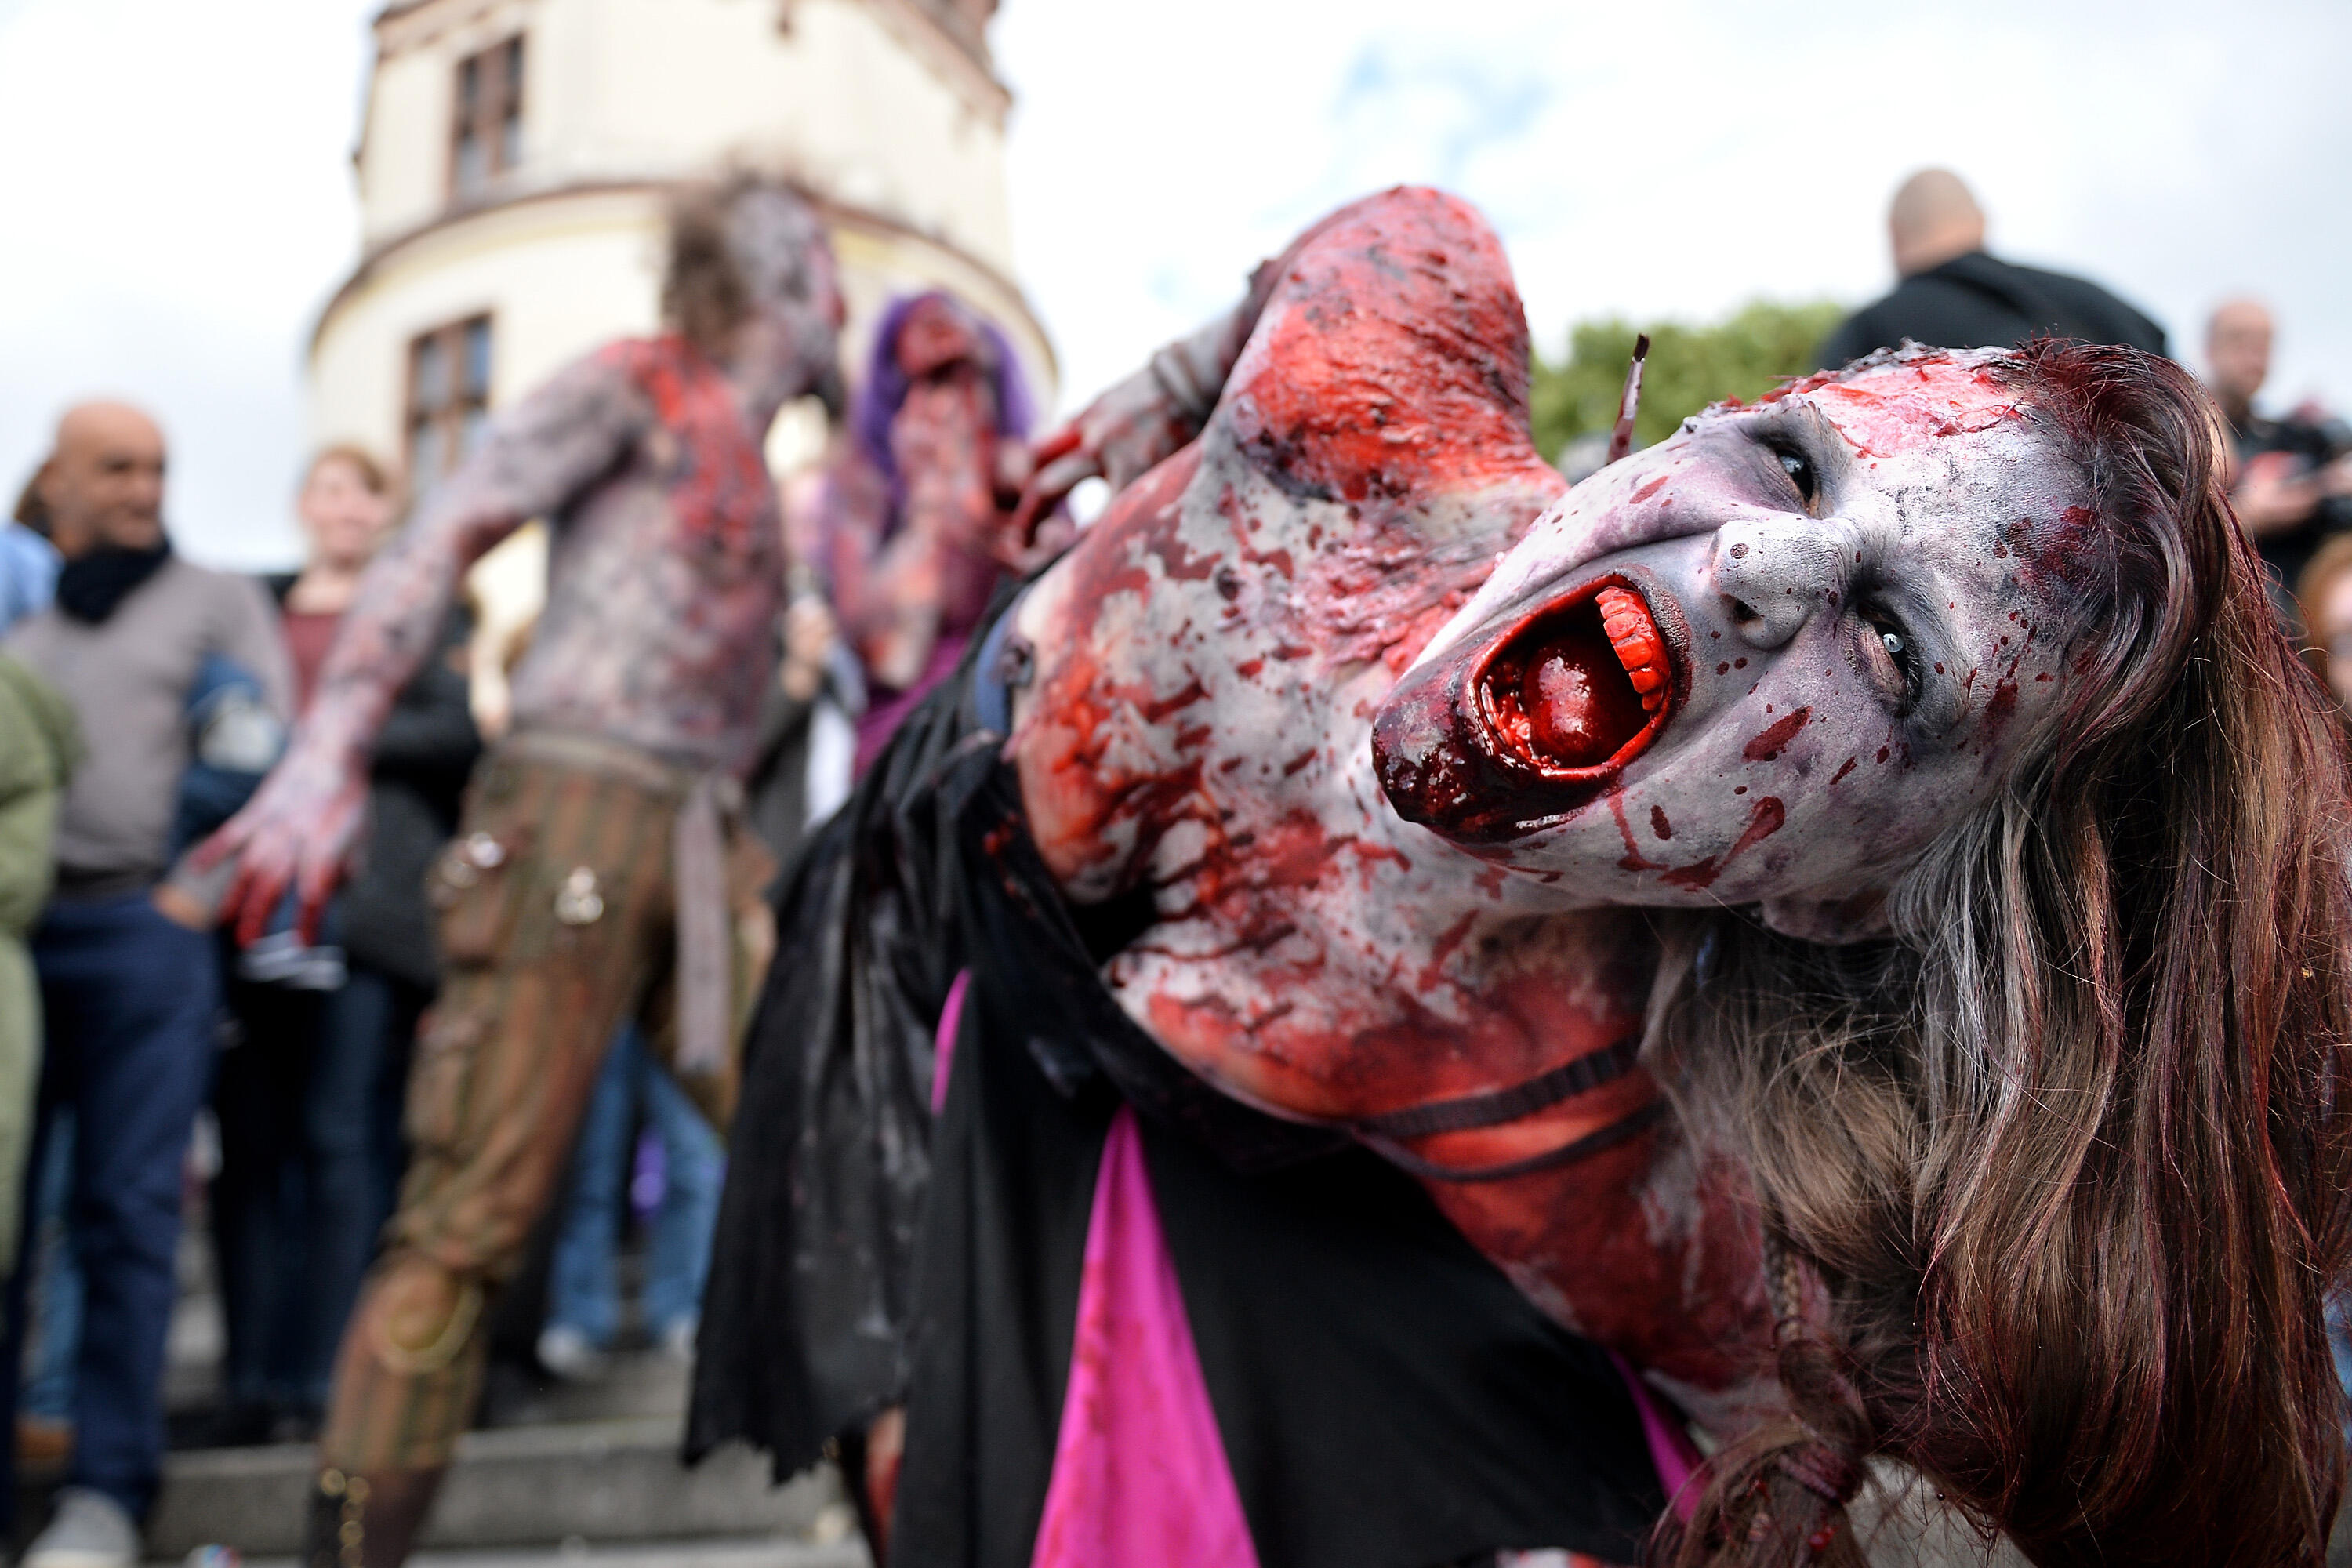 Participants take part at the Zombie Walk Duesseldorf along the Rheinuferpromenade on September 6, 2015 in Duesseldorf, Germany. A zombie walk is an organized public gathering of people who dress up in zombie costumes.